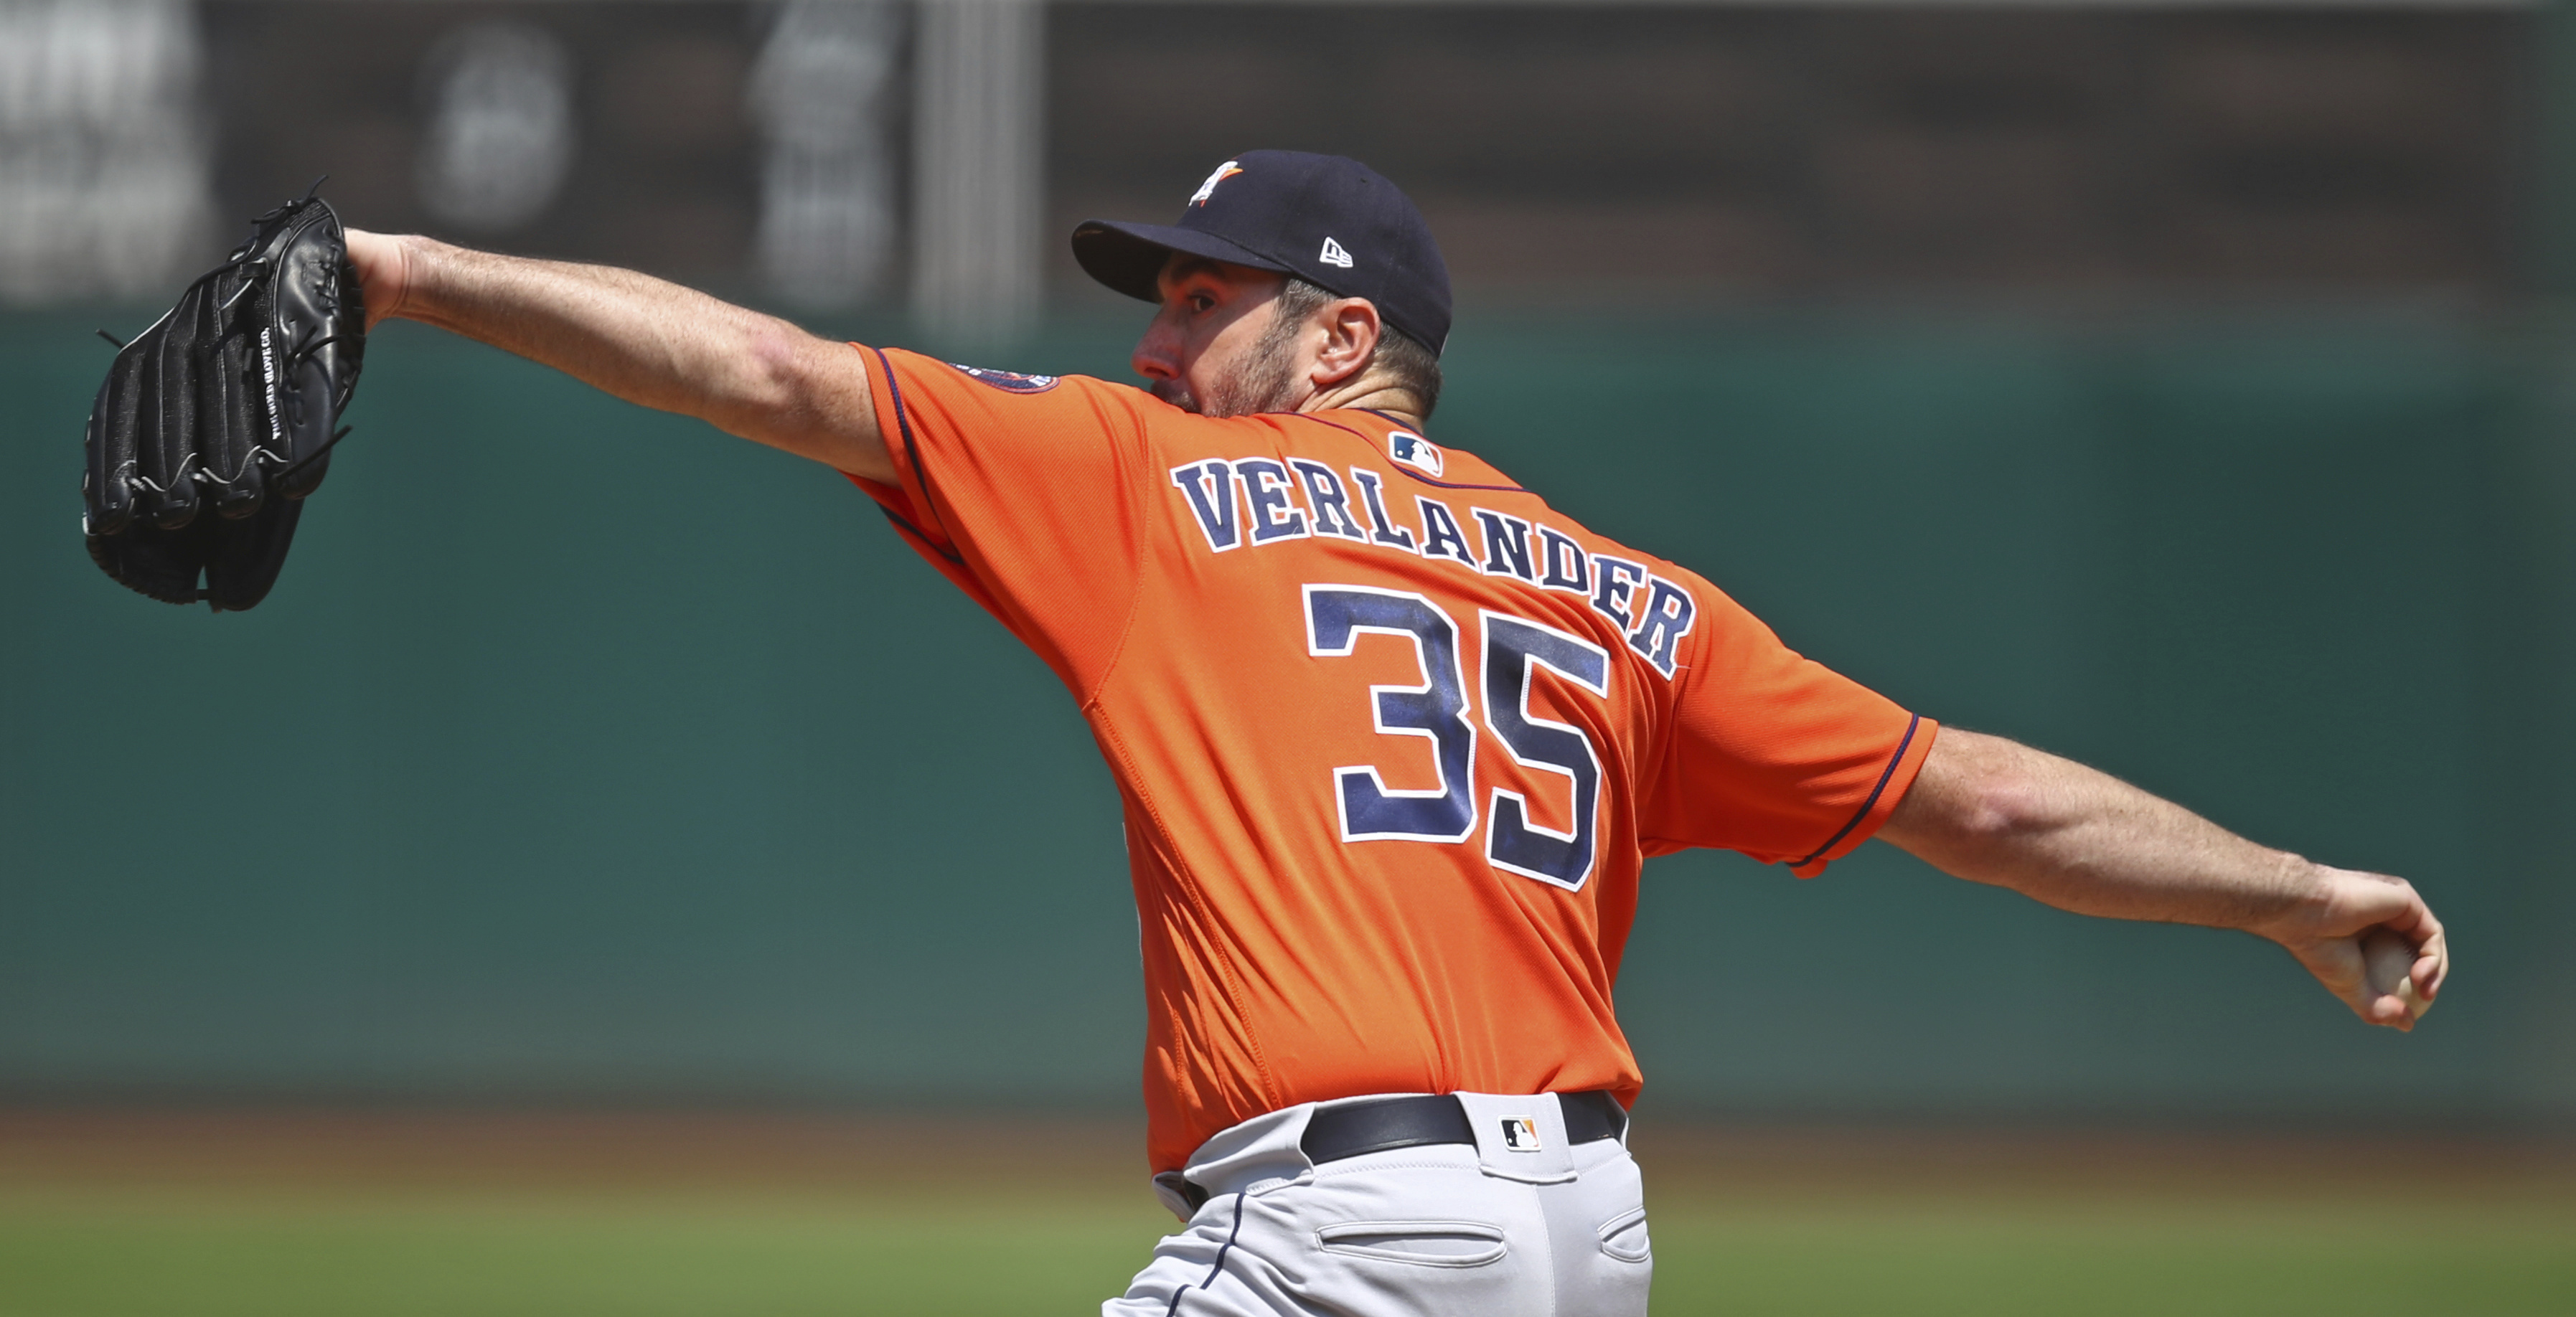 Verlander wins 200th, Astros back ahead of A’s with 9-4 win